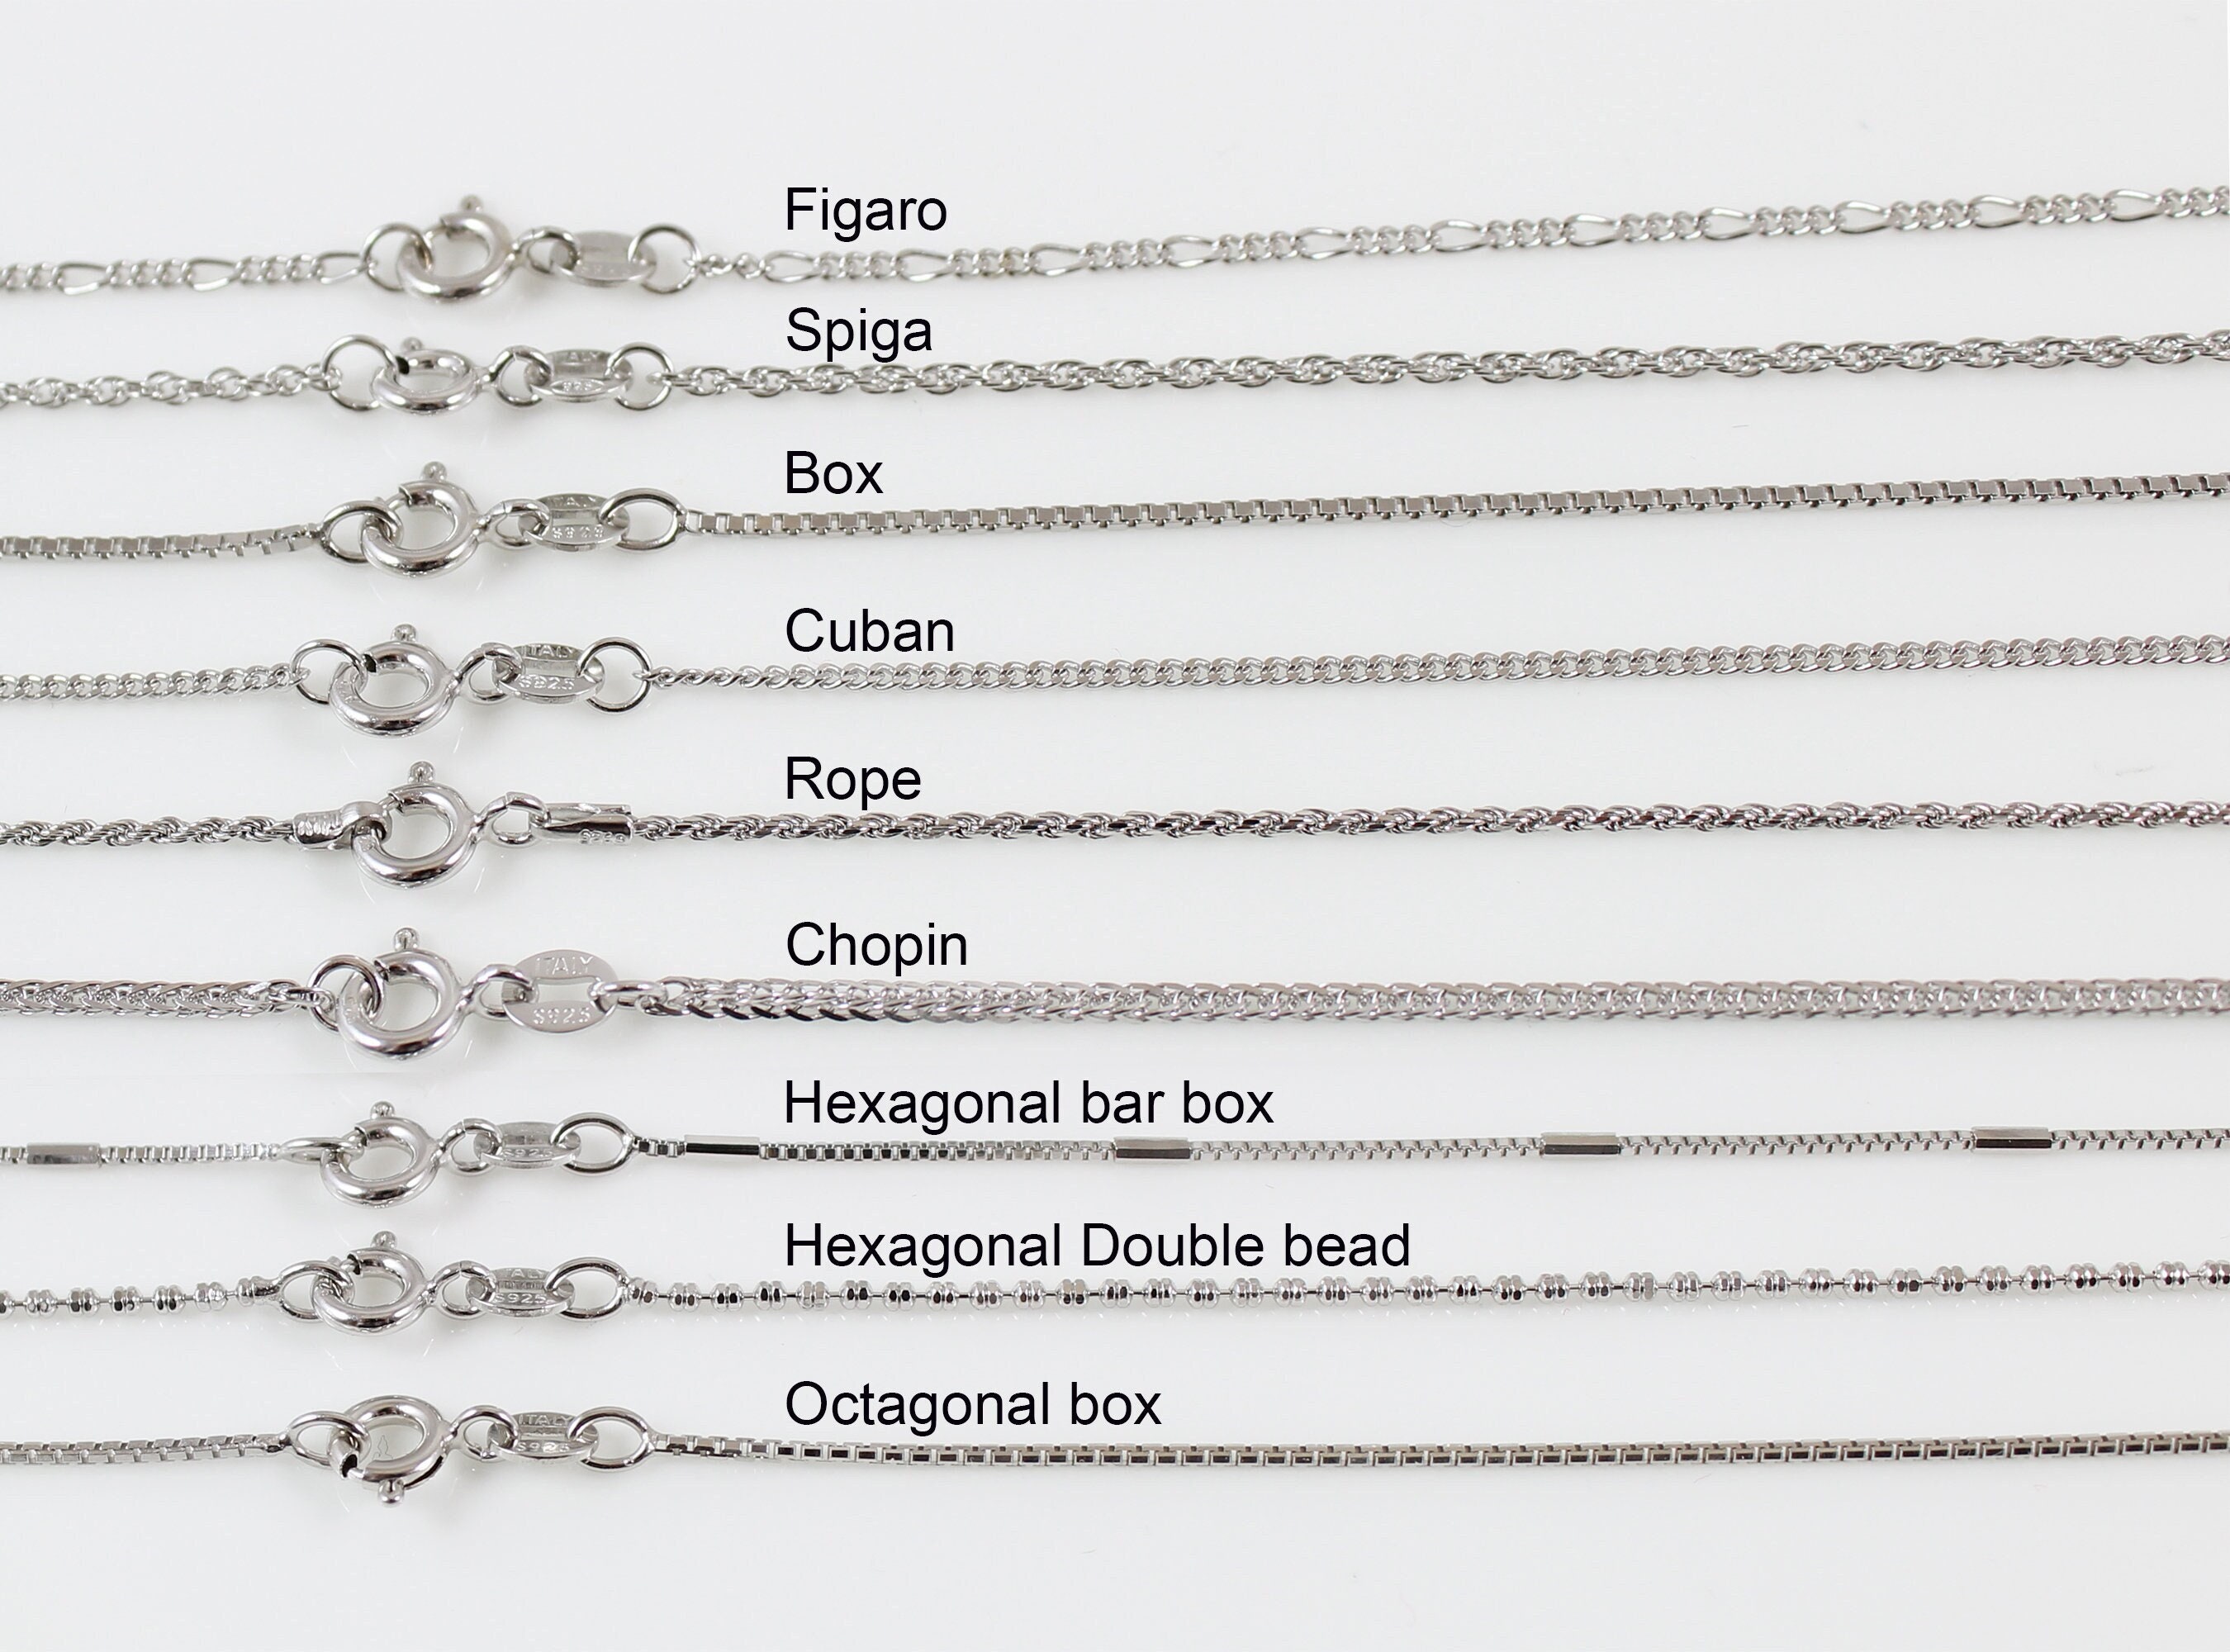 STERLING SILVER CURB LINK CHAIN NECKLACE - Howard's Jewelry Center